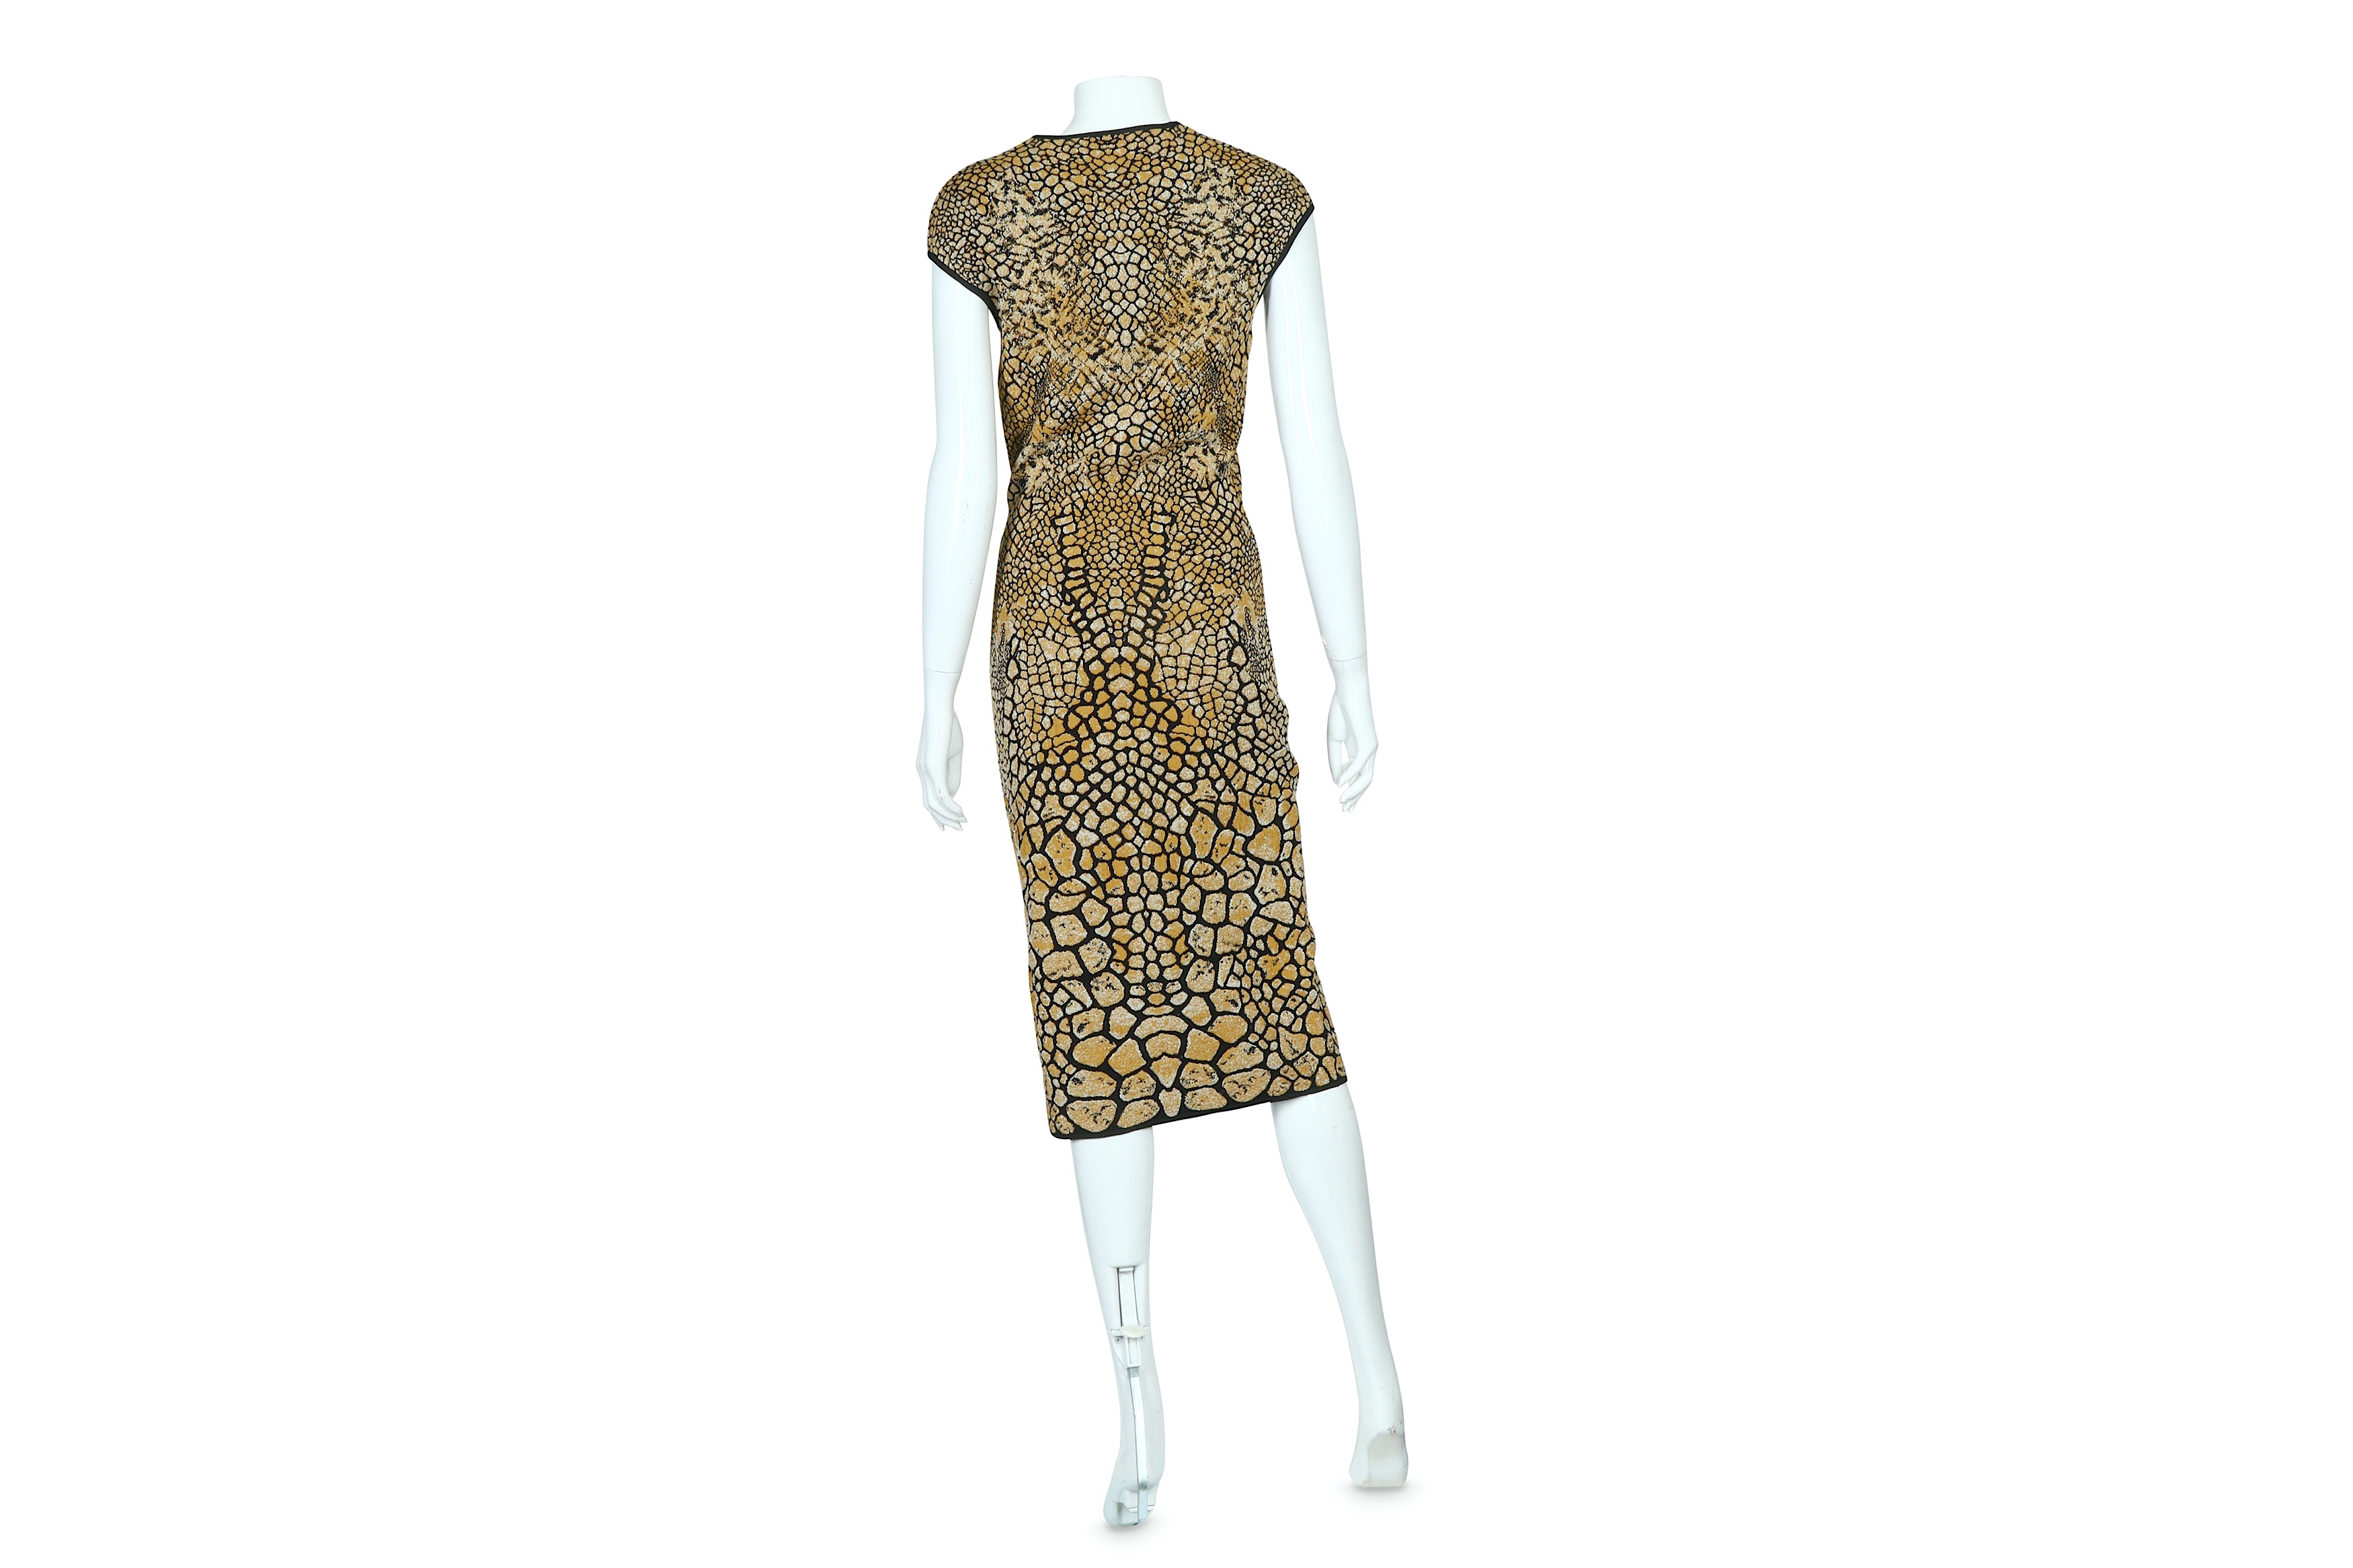 Alexander McQueen Stretch Knit Black and Gold Dress - Image 3 of 4